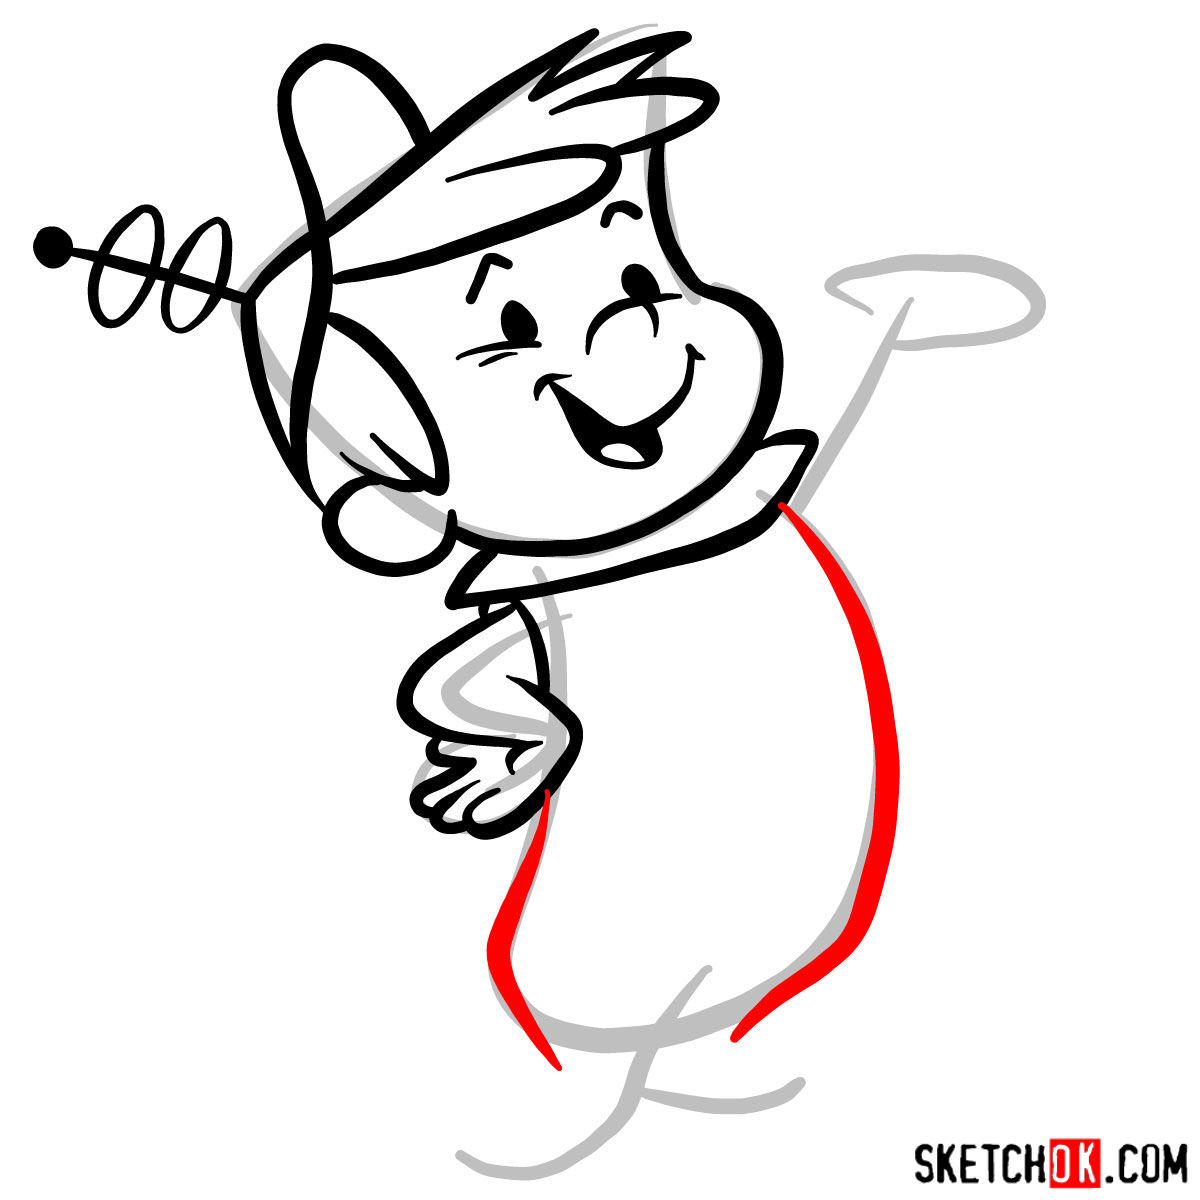 How to draw Elroy Jetson | The Jetsons - Sketchok easy drawing guides